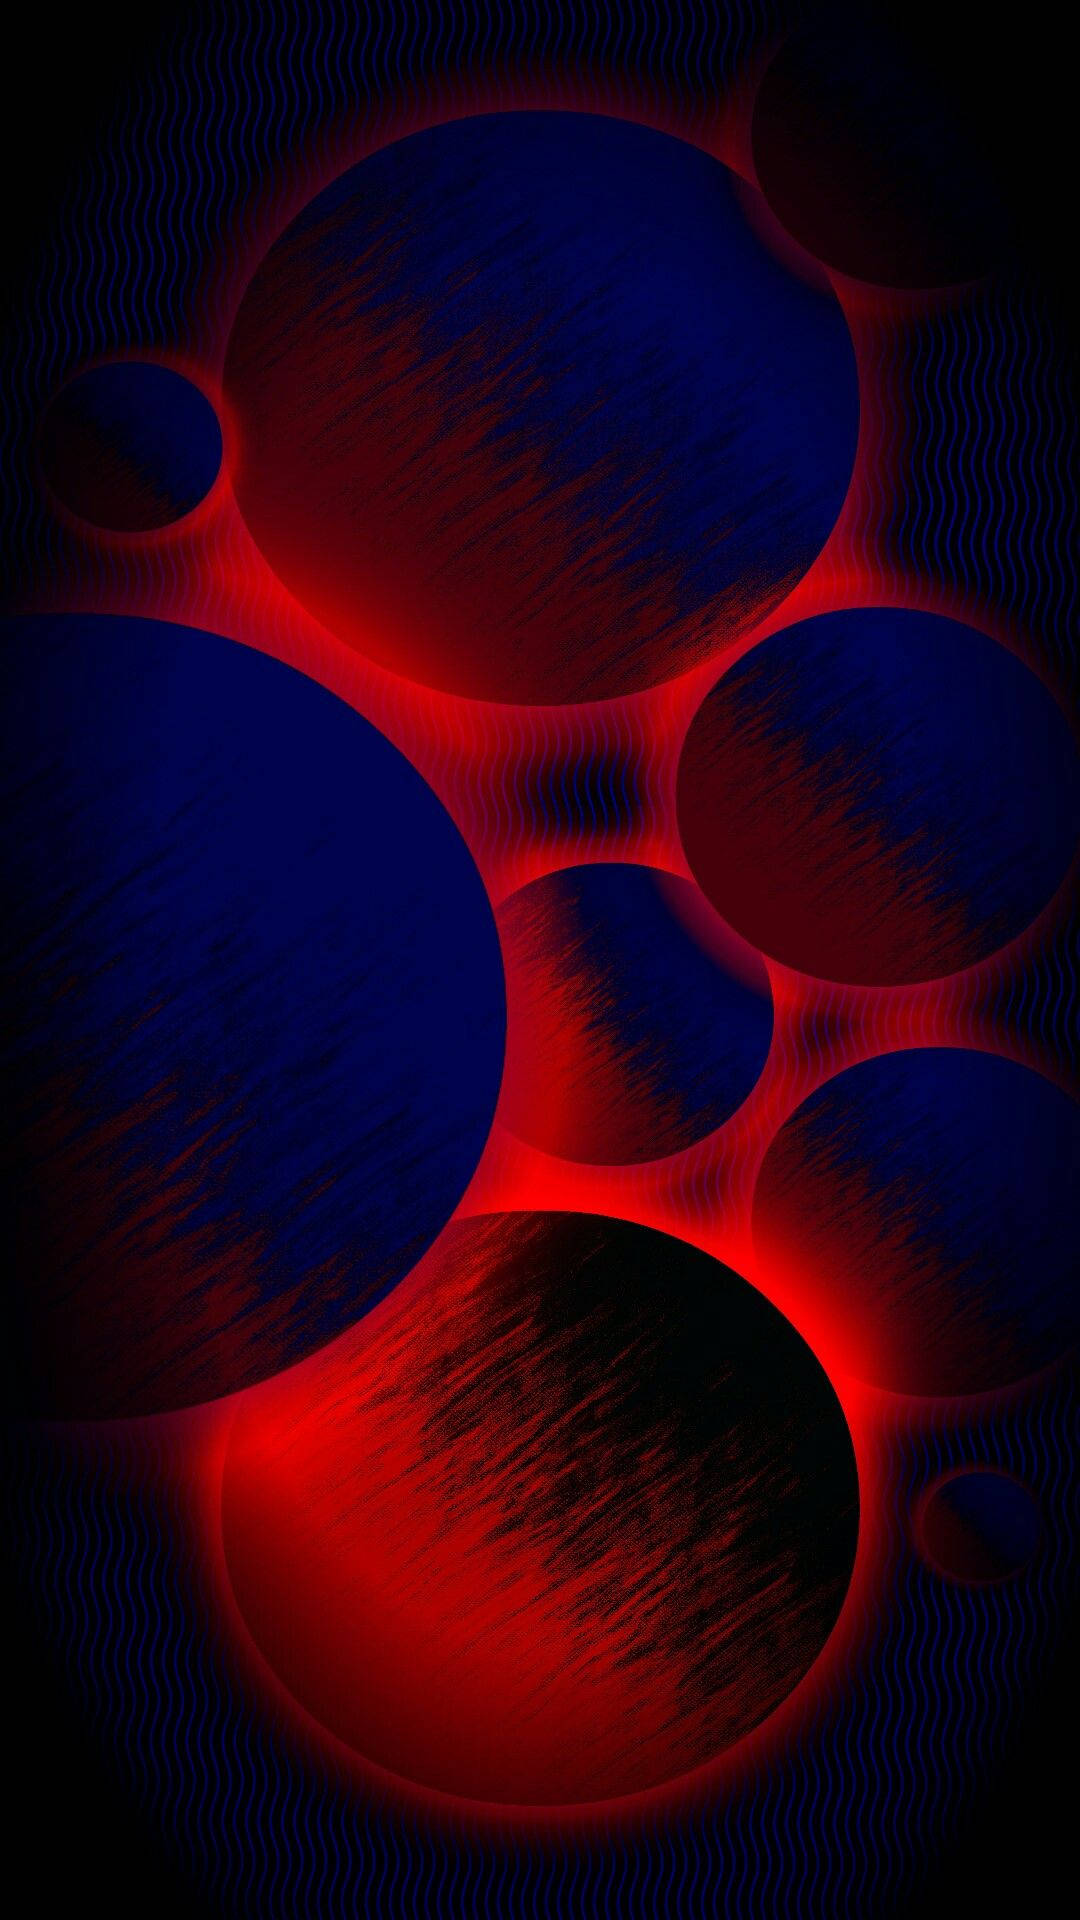 Red And Blue Spheres